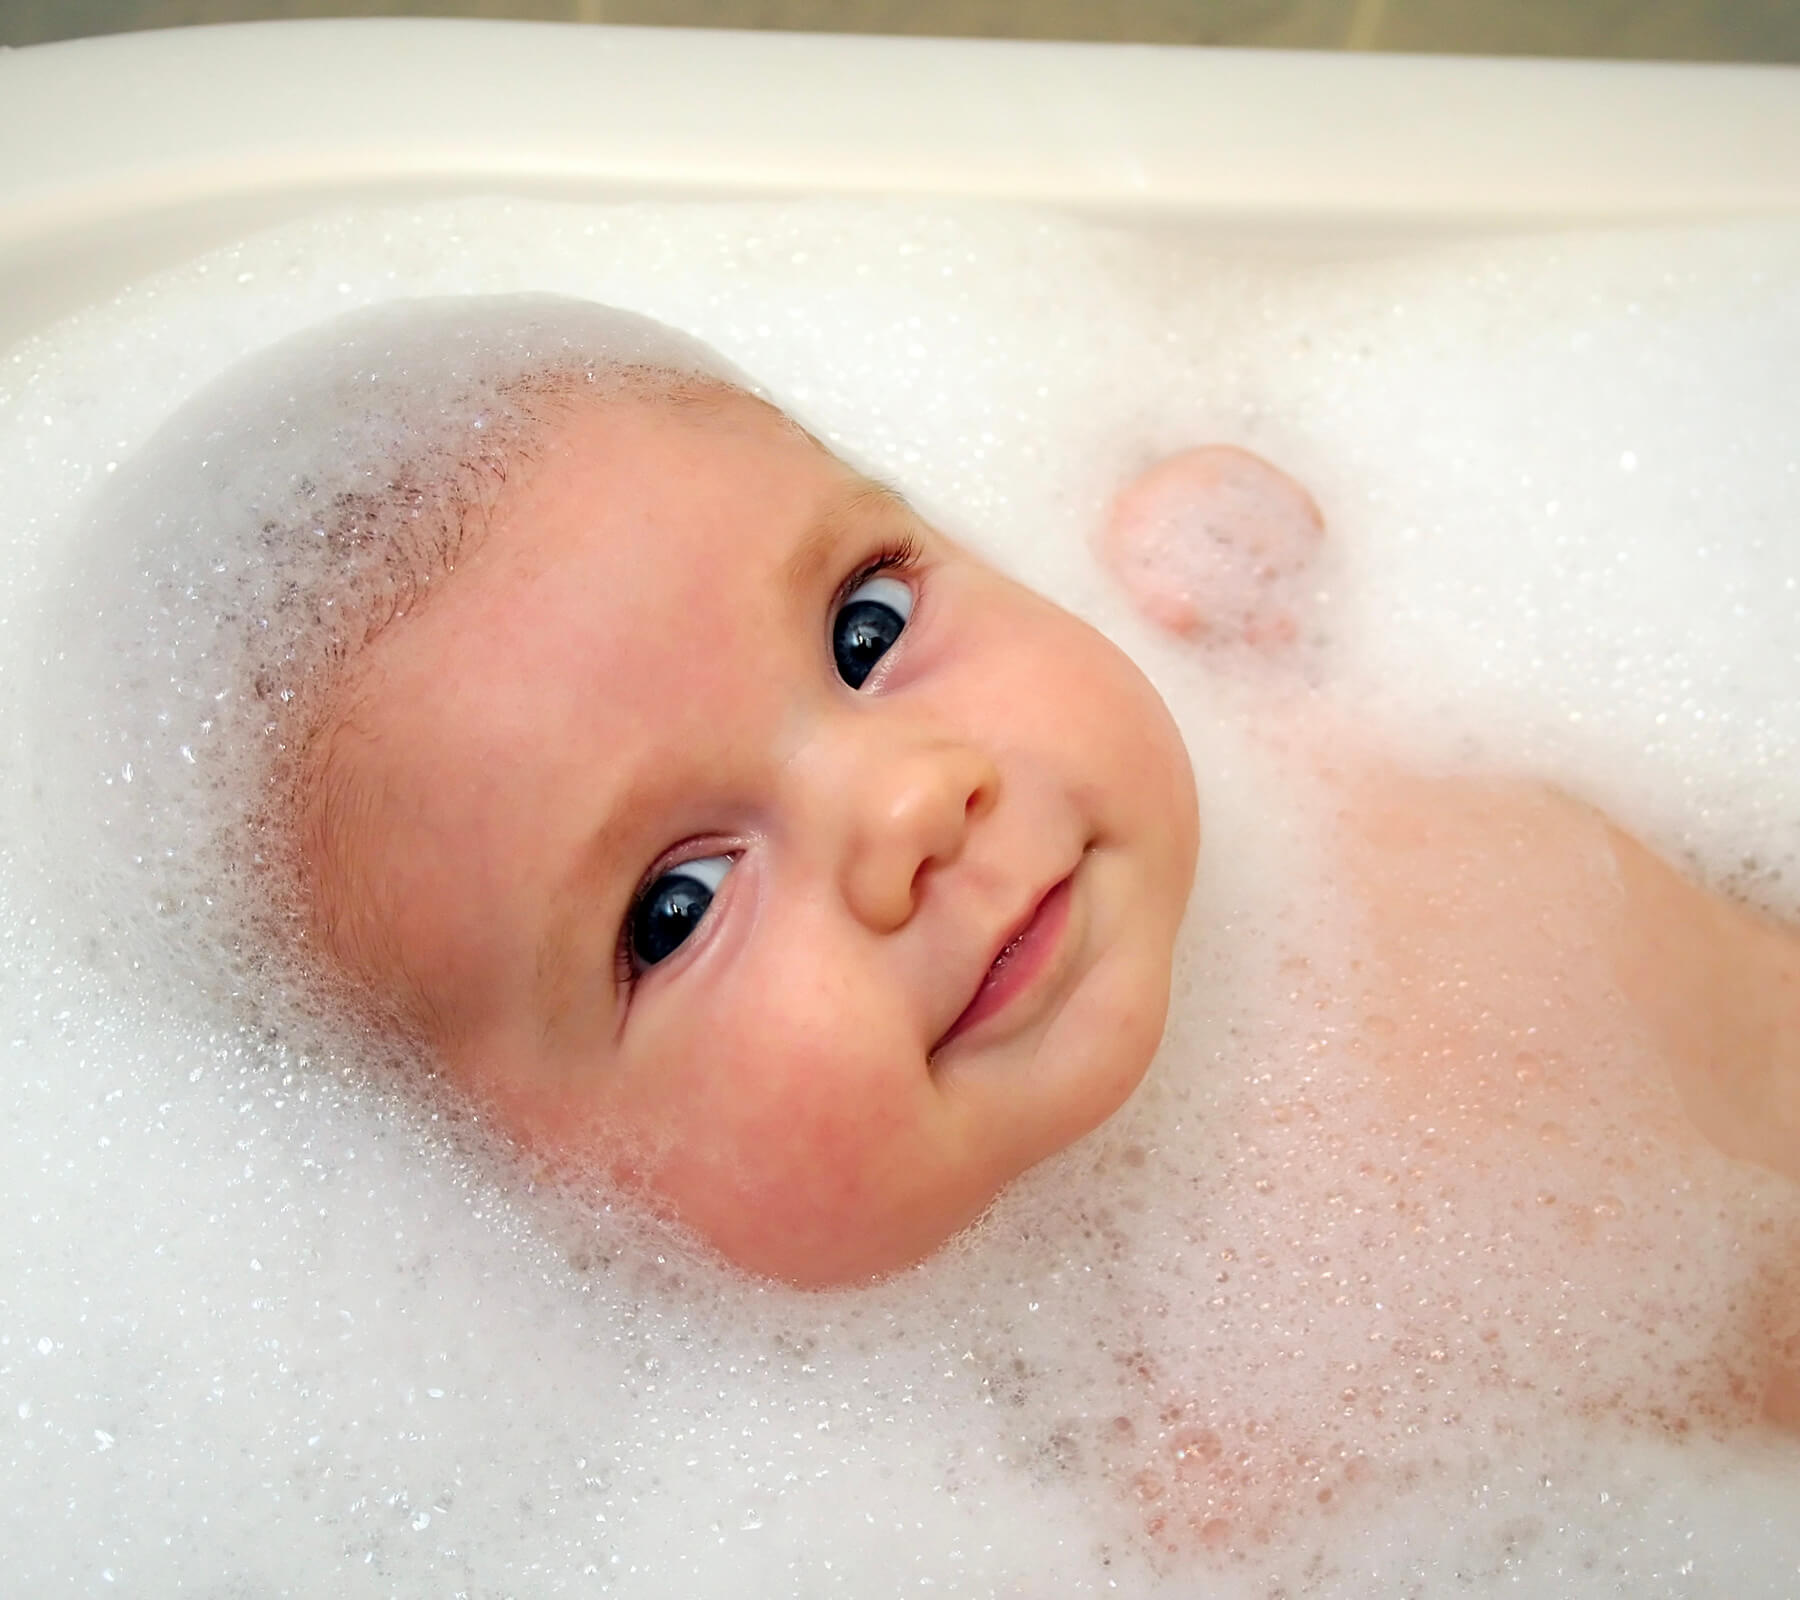 12 Easy Activities to Make Bath Time Great for Baby’s Body and Mind